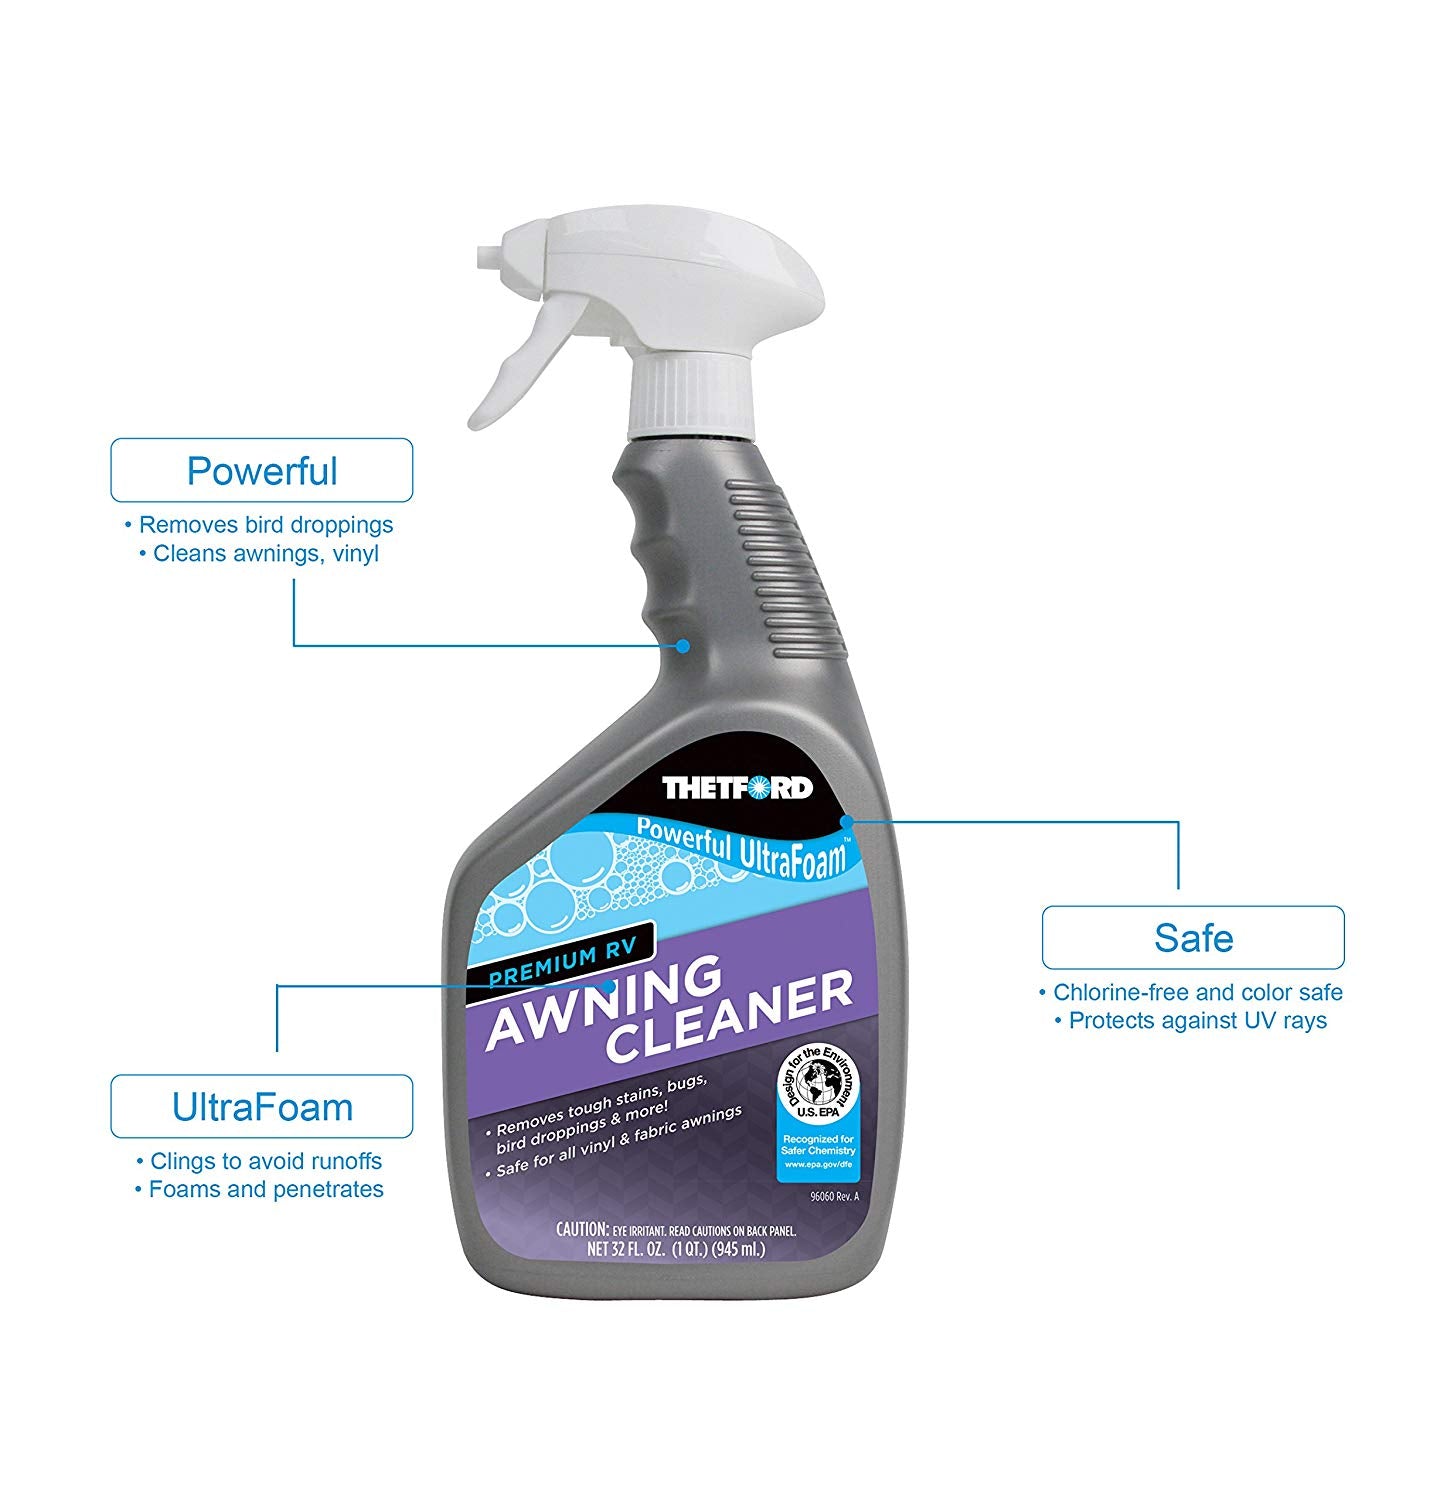 Thetford Premium RV Awning Cleaner -UltraFoam - for RV or Home Awnings - 32 oz 32822 